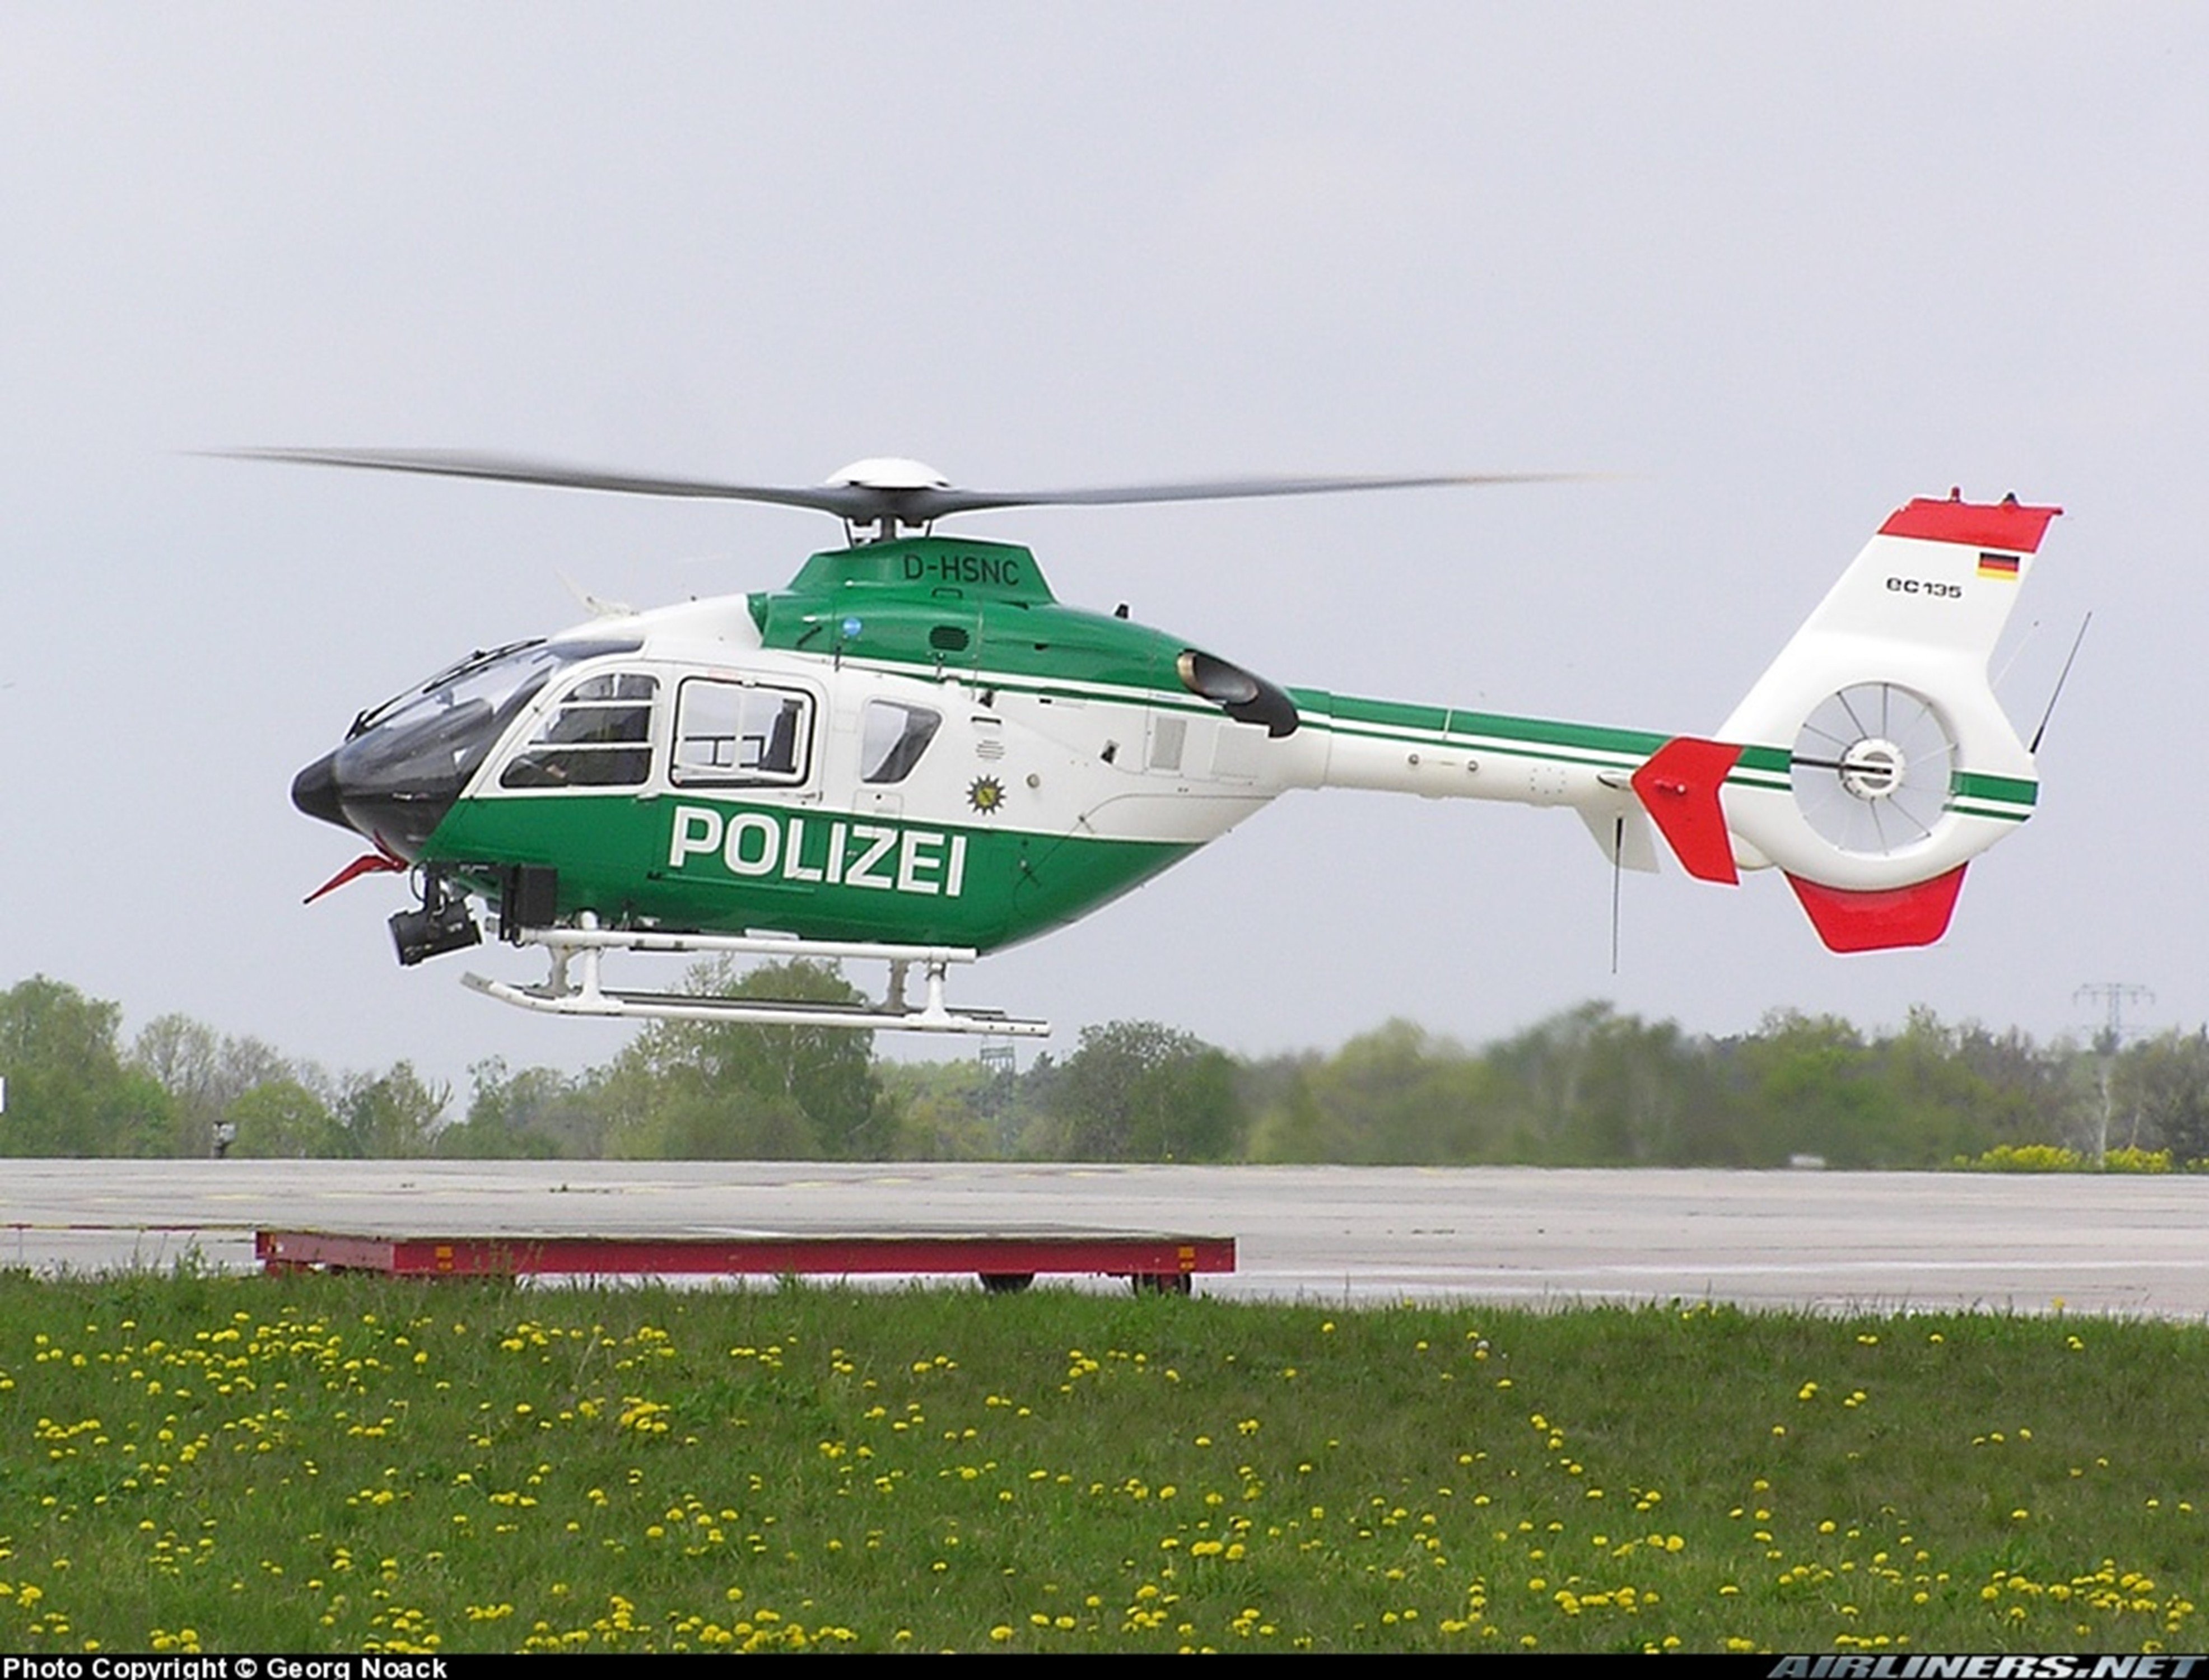 helicopter, Aircraft, Police, Eurocopter, Ec 135, Germany Wallpaper